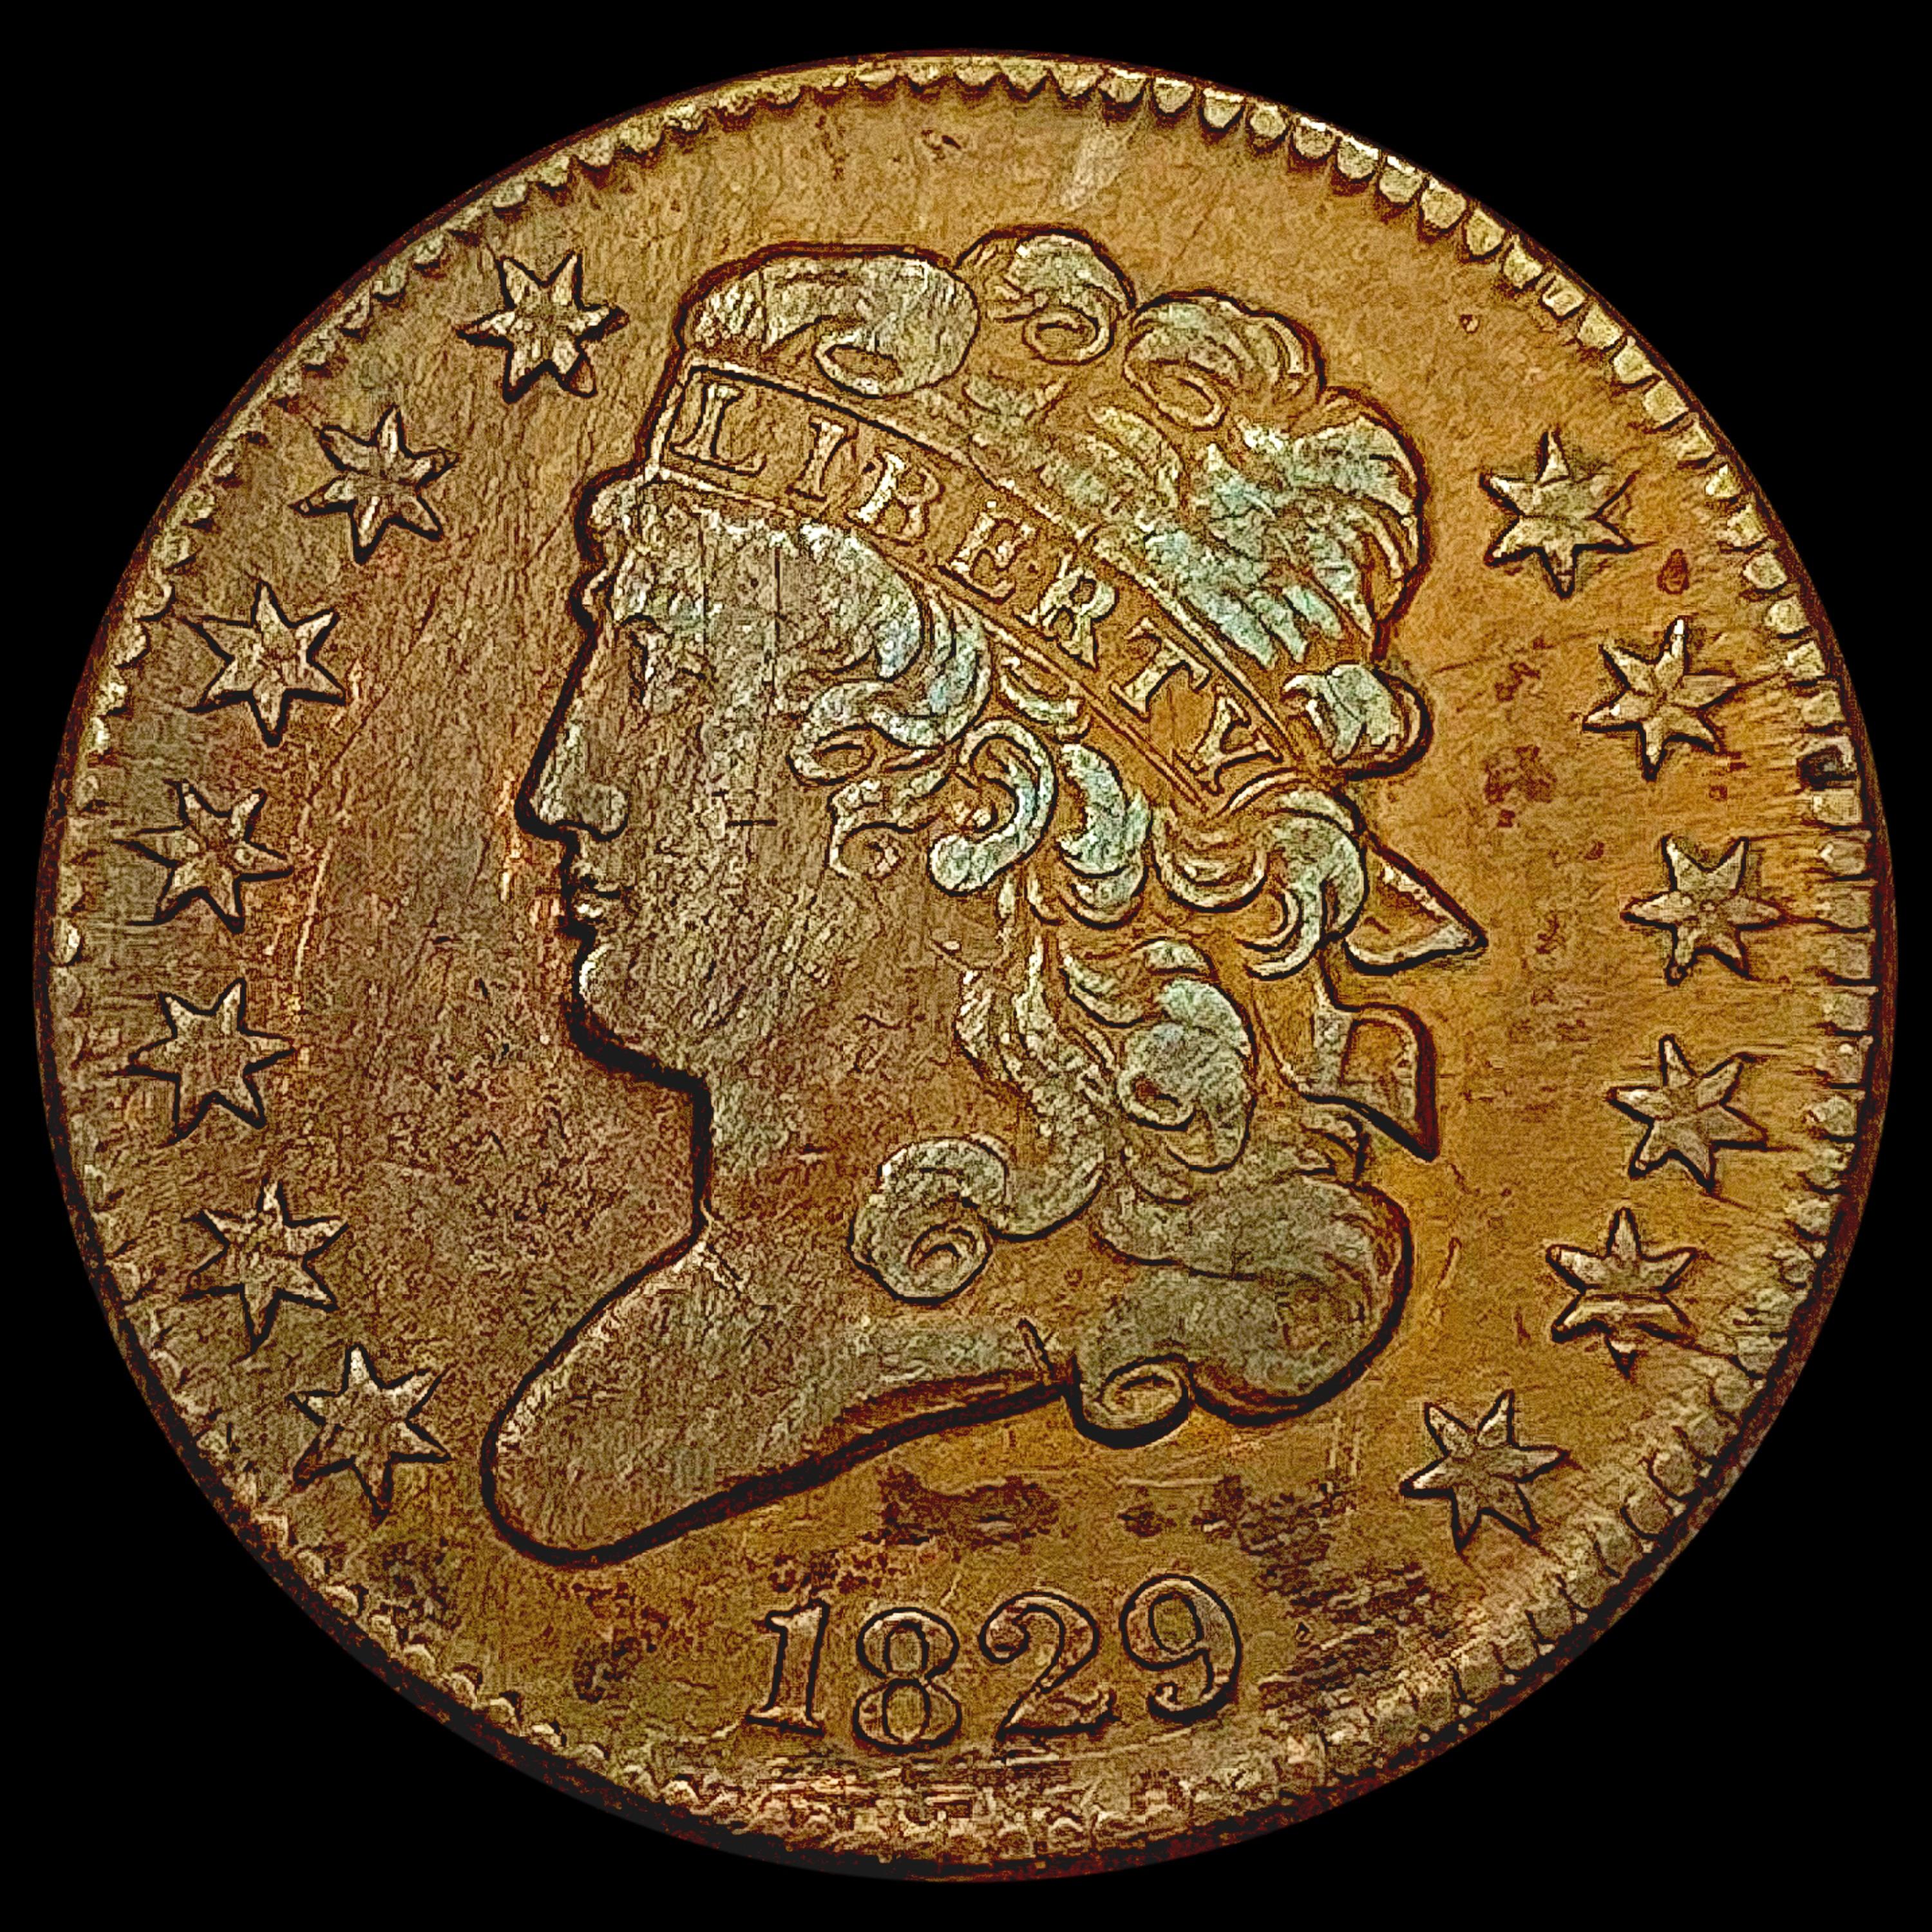 1829 Classic Head Half Cent LIGHTLY CIRCULATED